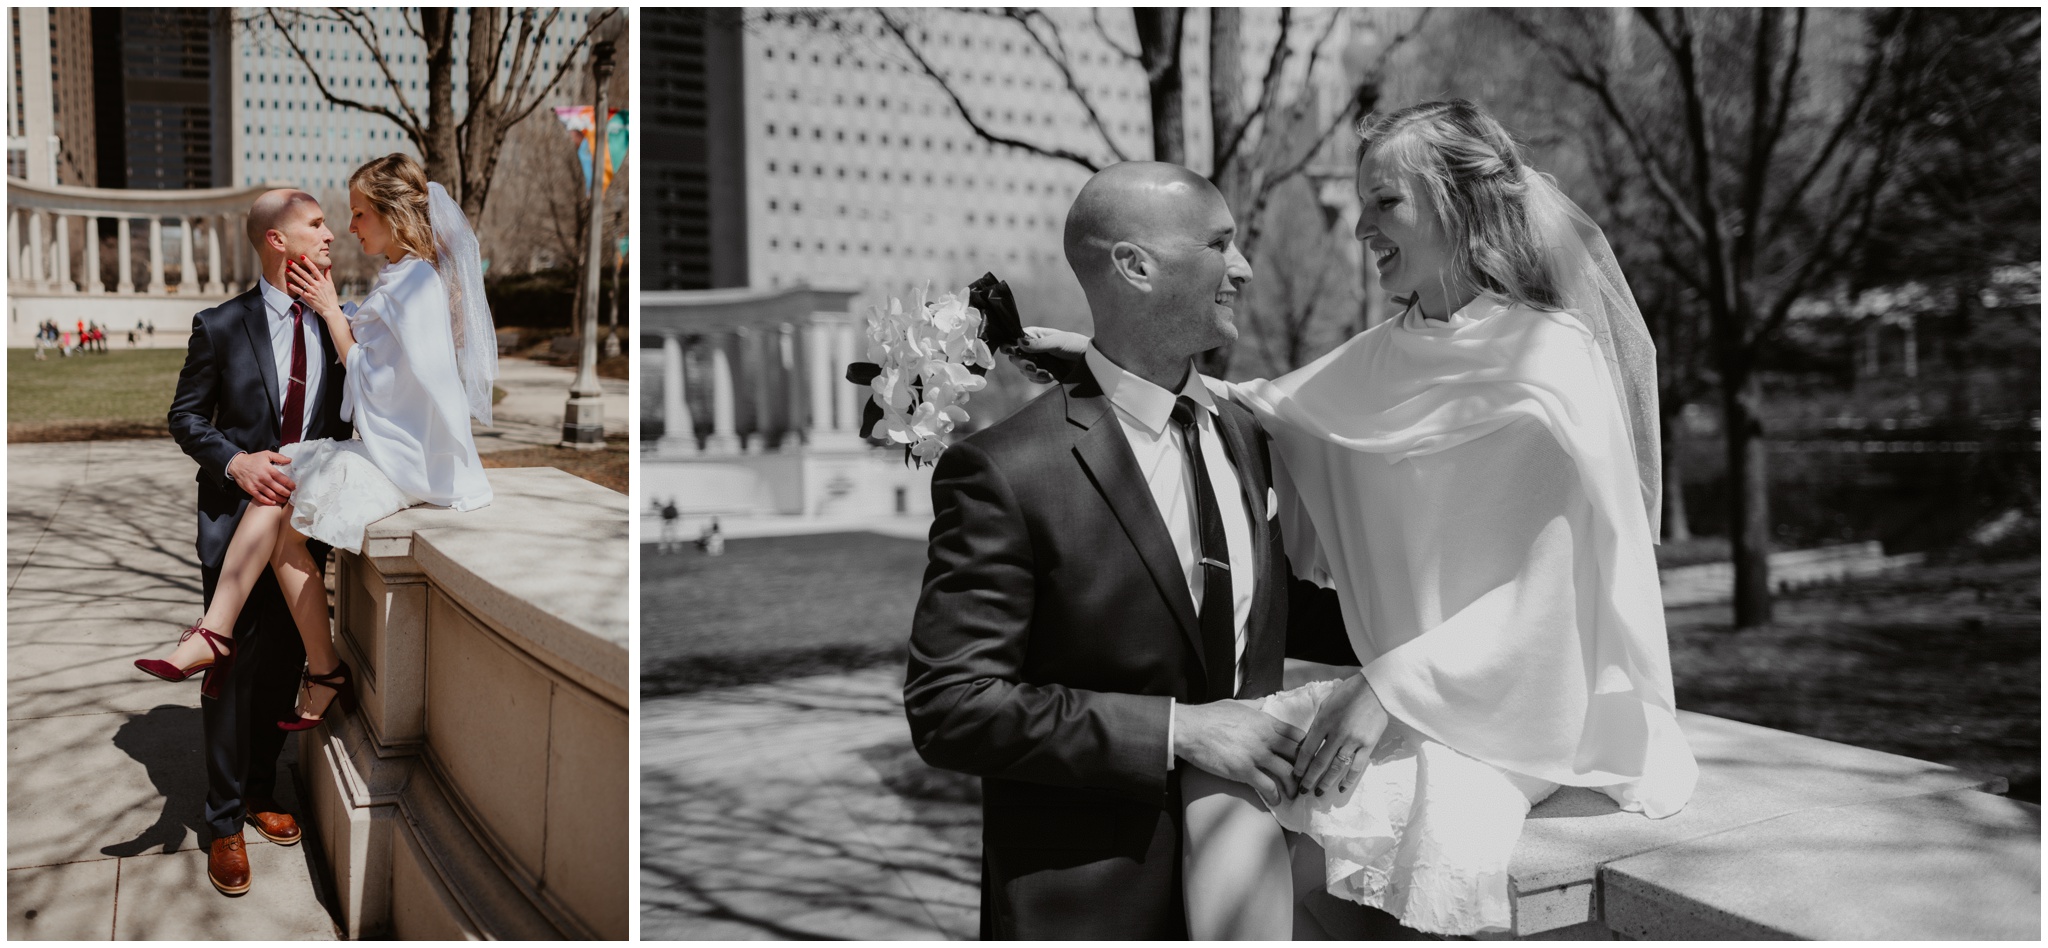 The Morros Chicago Wedding Photography Olga and Jeff Downtown Chicago City Hall Elopement_0075.jpg